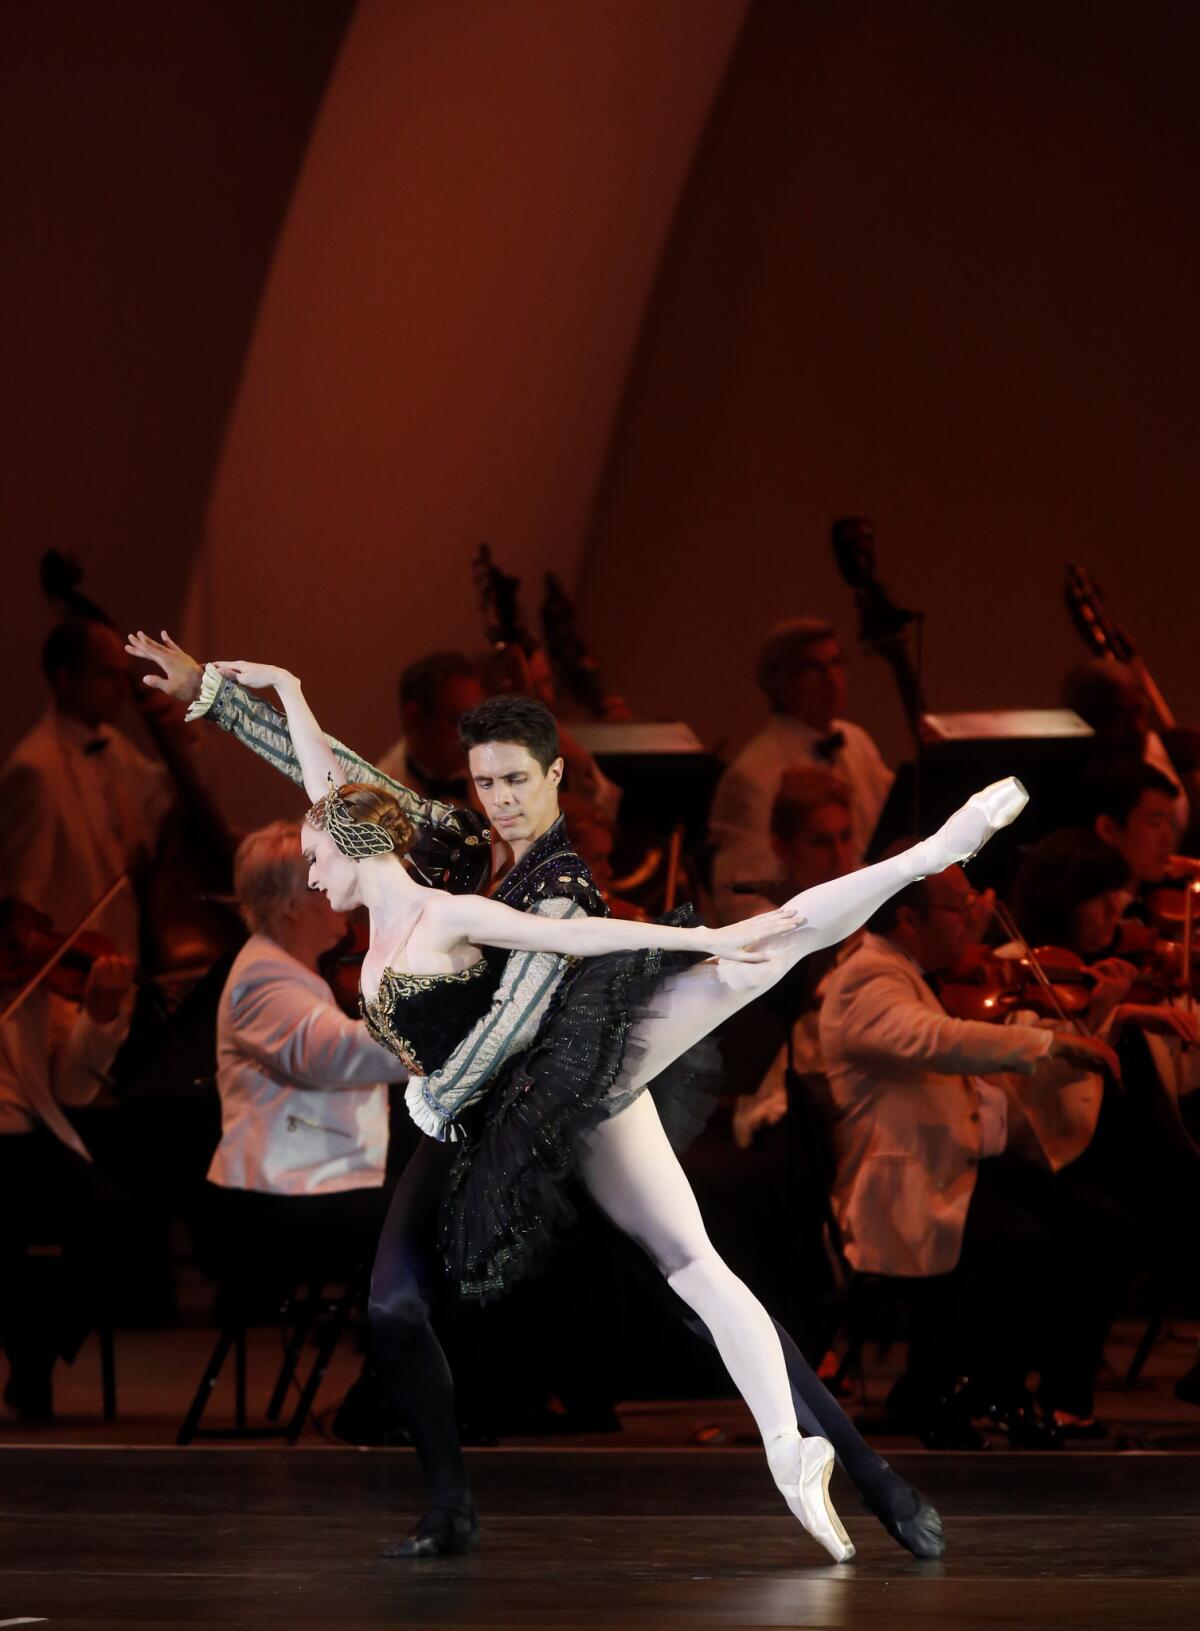 ABT dancers Gillian Murphy and Alexandre Hammoudi perform at the Hollywood Bowl. (Francine Orr / Los Angeles Times)